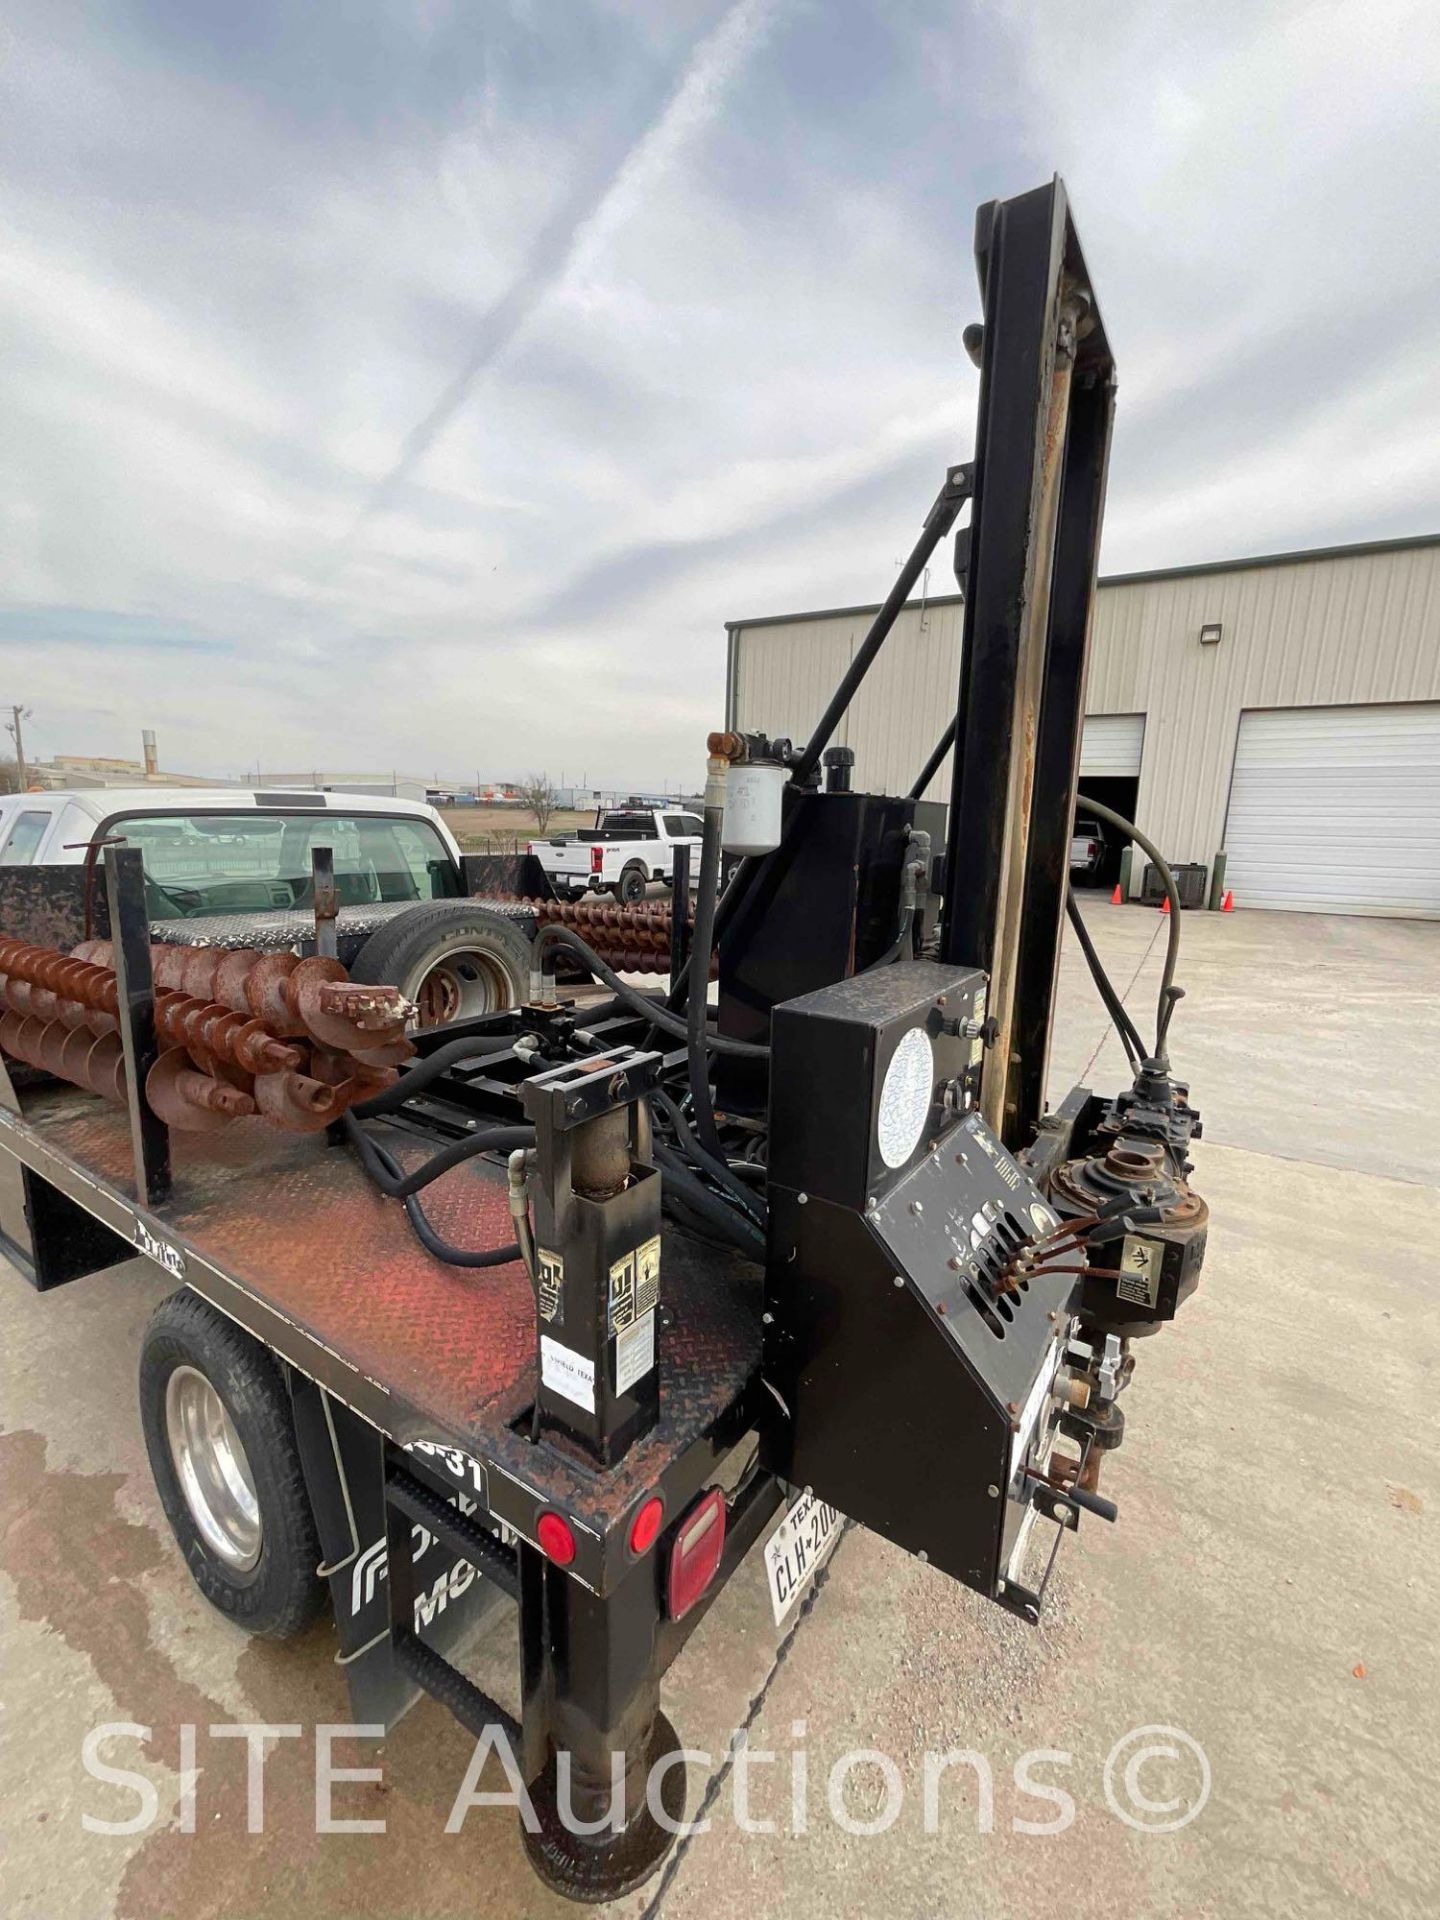 2006 Ford F250 SD Extended Cab Drill Rig Truck - Image 4 of 8